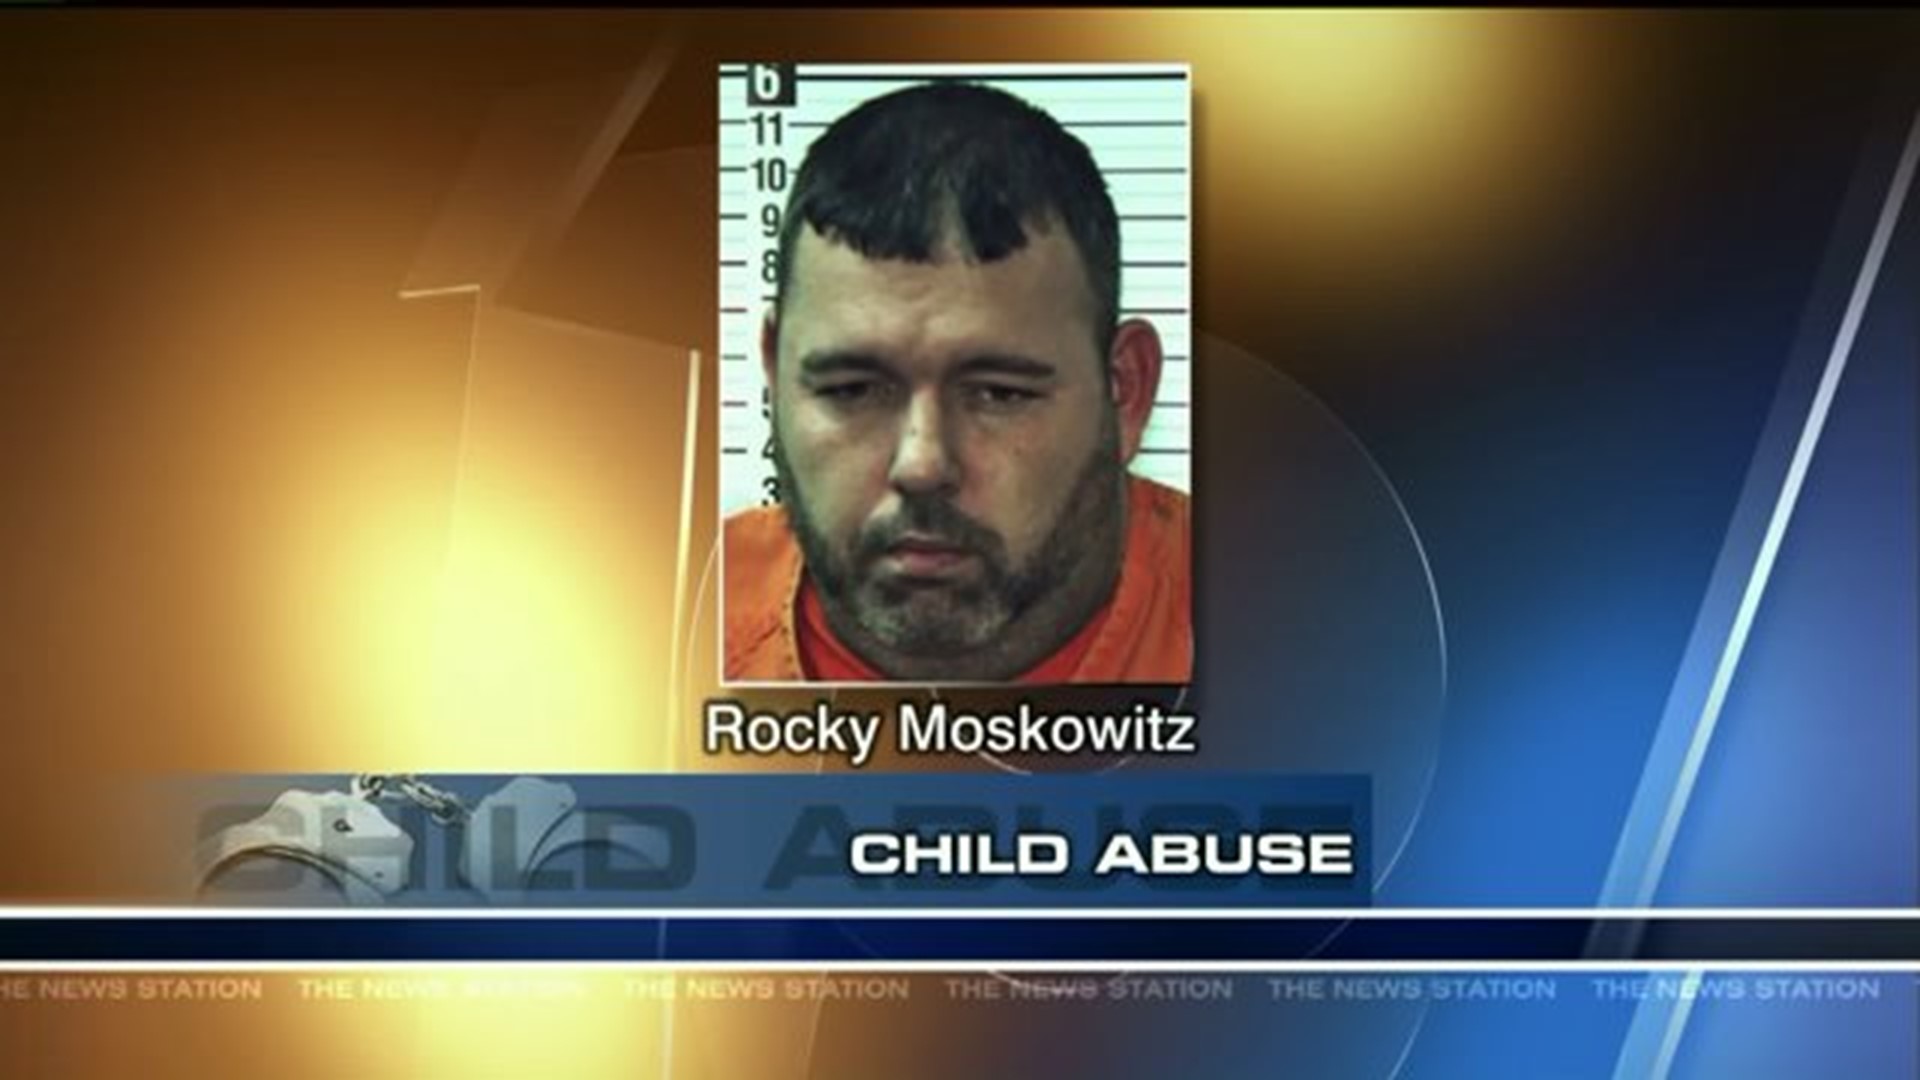 Man Shoots Step-Children with Airsoft Guns as Punishment, Behind Bars